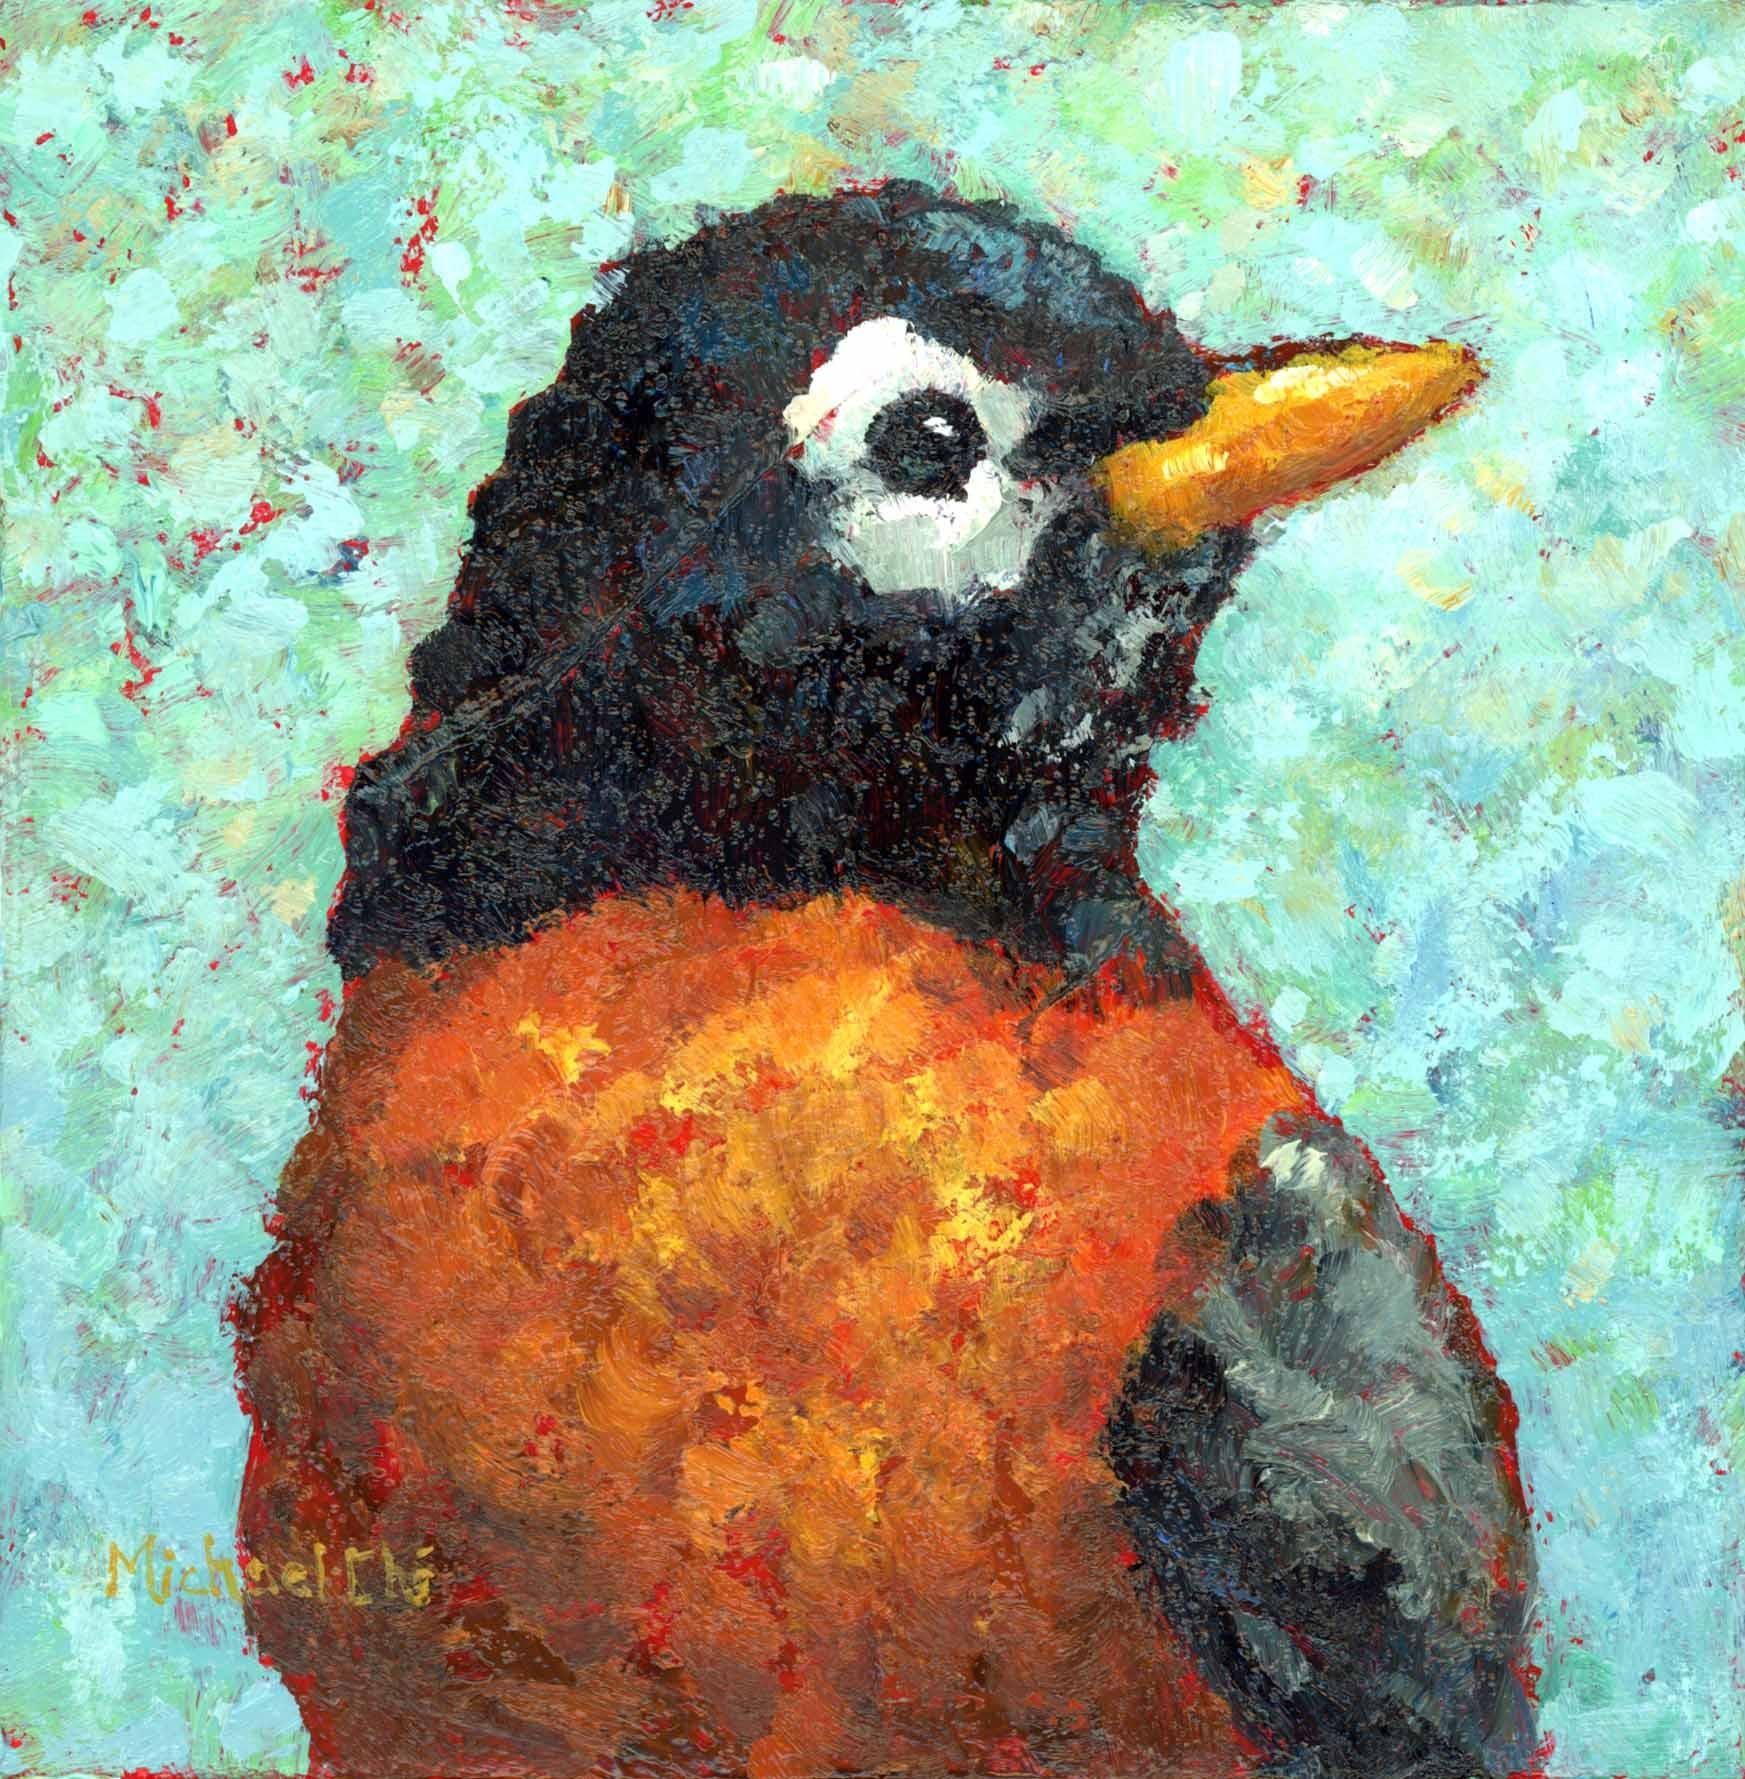 Michael-Che Swisher Animal Painting - "Spring is in the Air" Painting of an Orange and Black Bird on Blue Background